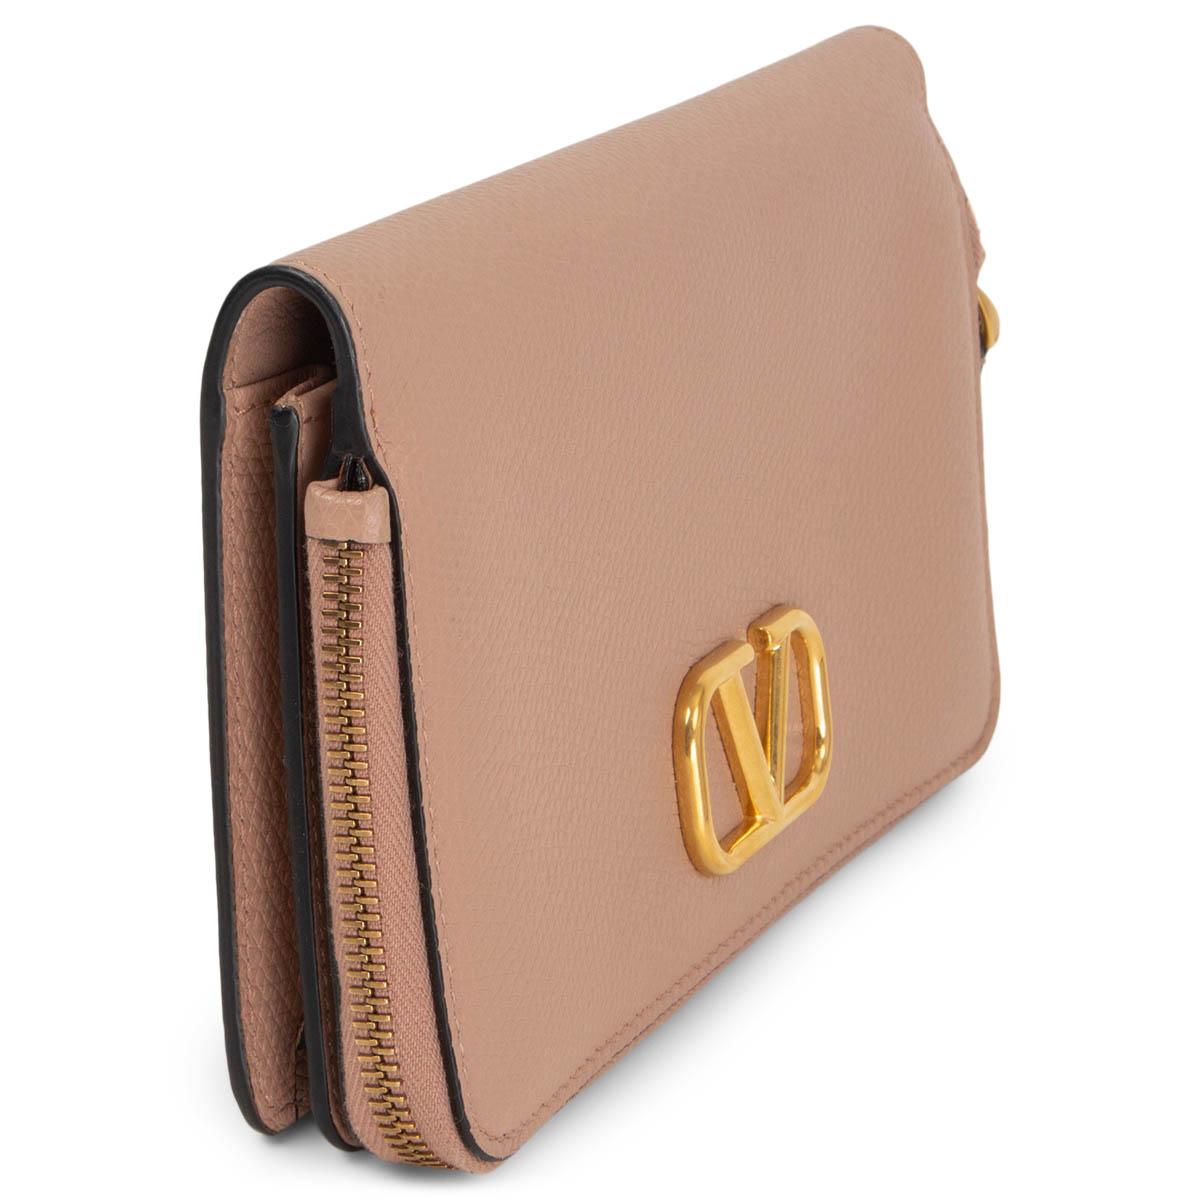 100% authentic Valentino V Logo wallet in Rose Cannelle (nude pink) grained calfskin with gold-tone metal hardware. Opens with a zipper to a big coin pocket lined in nude nylon. The other compartment opens with a push-button and is lined in smooth